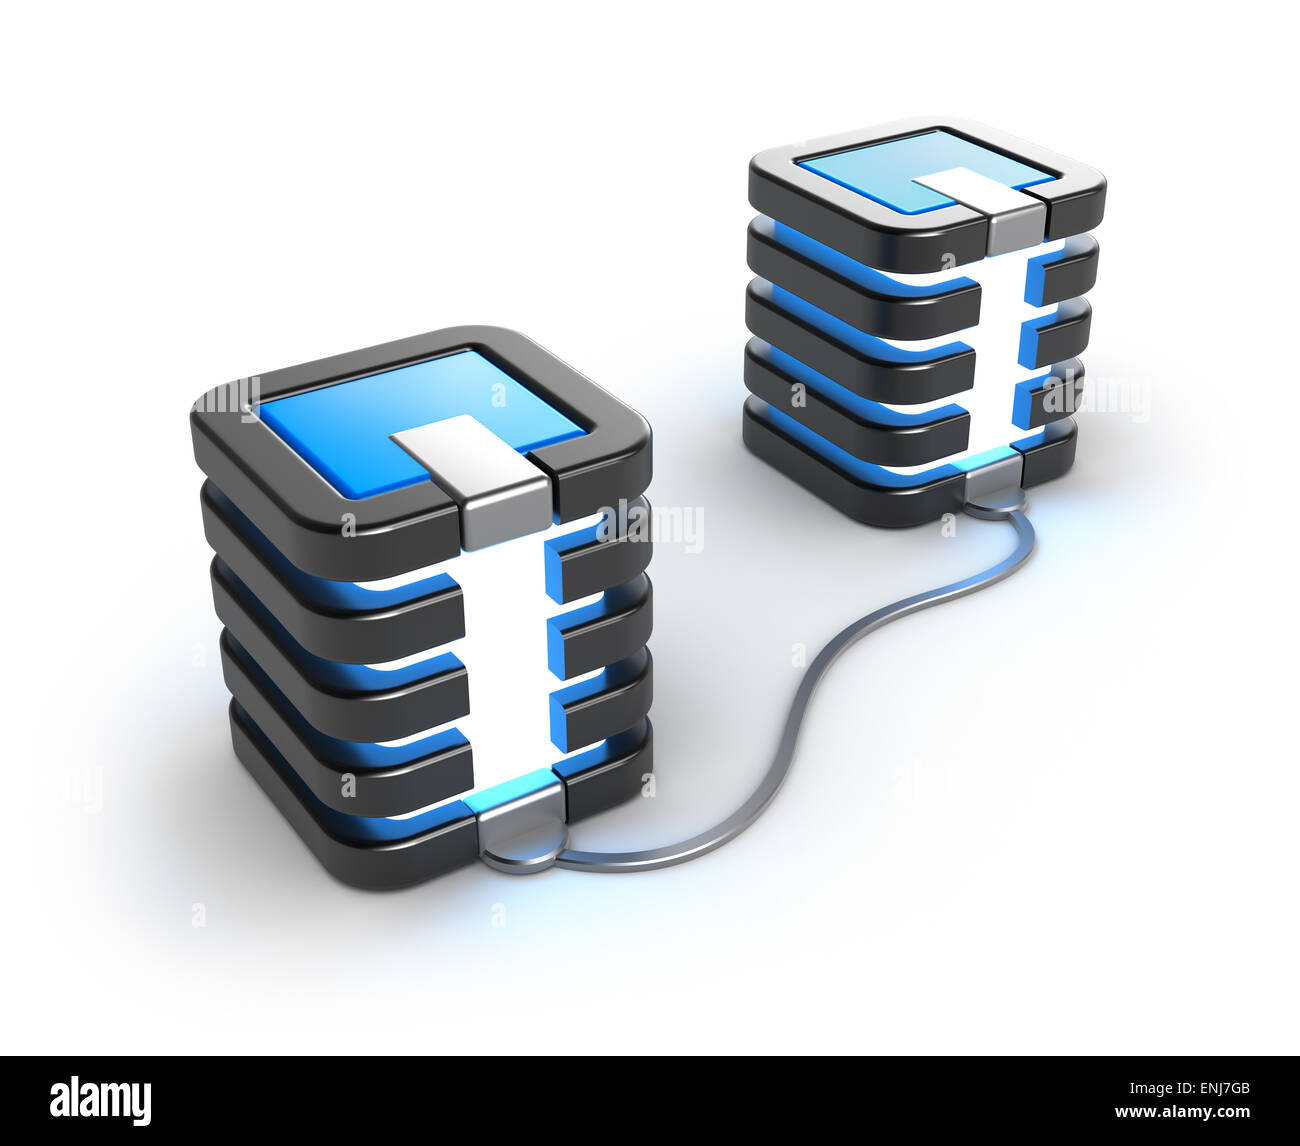 Mainframe servers connected to each other. On white background. Stock Photo